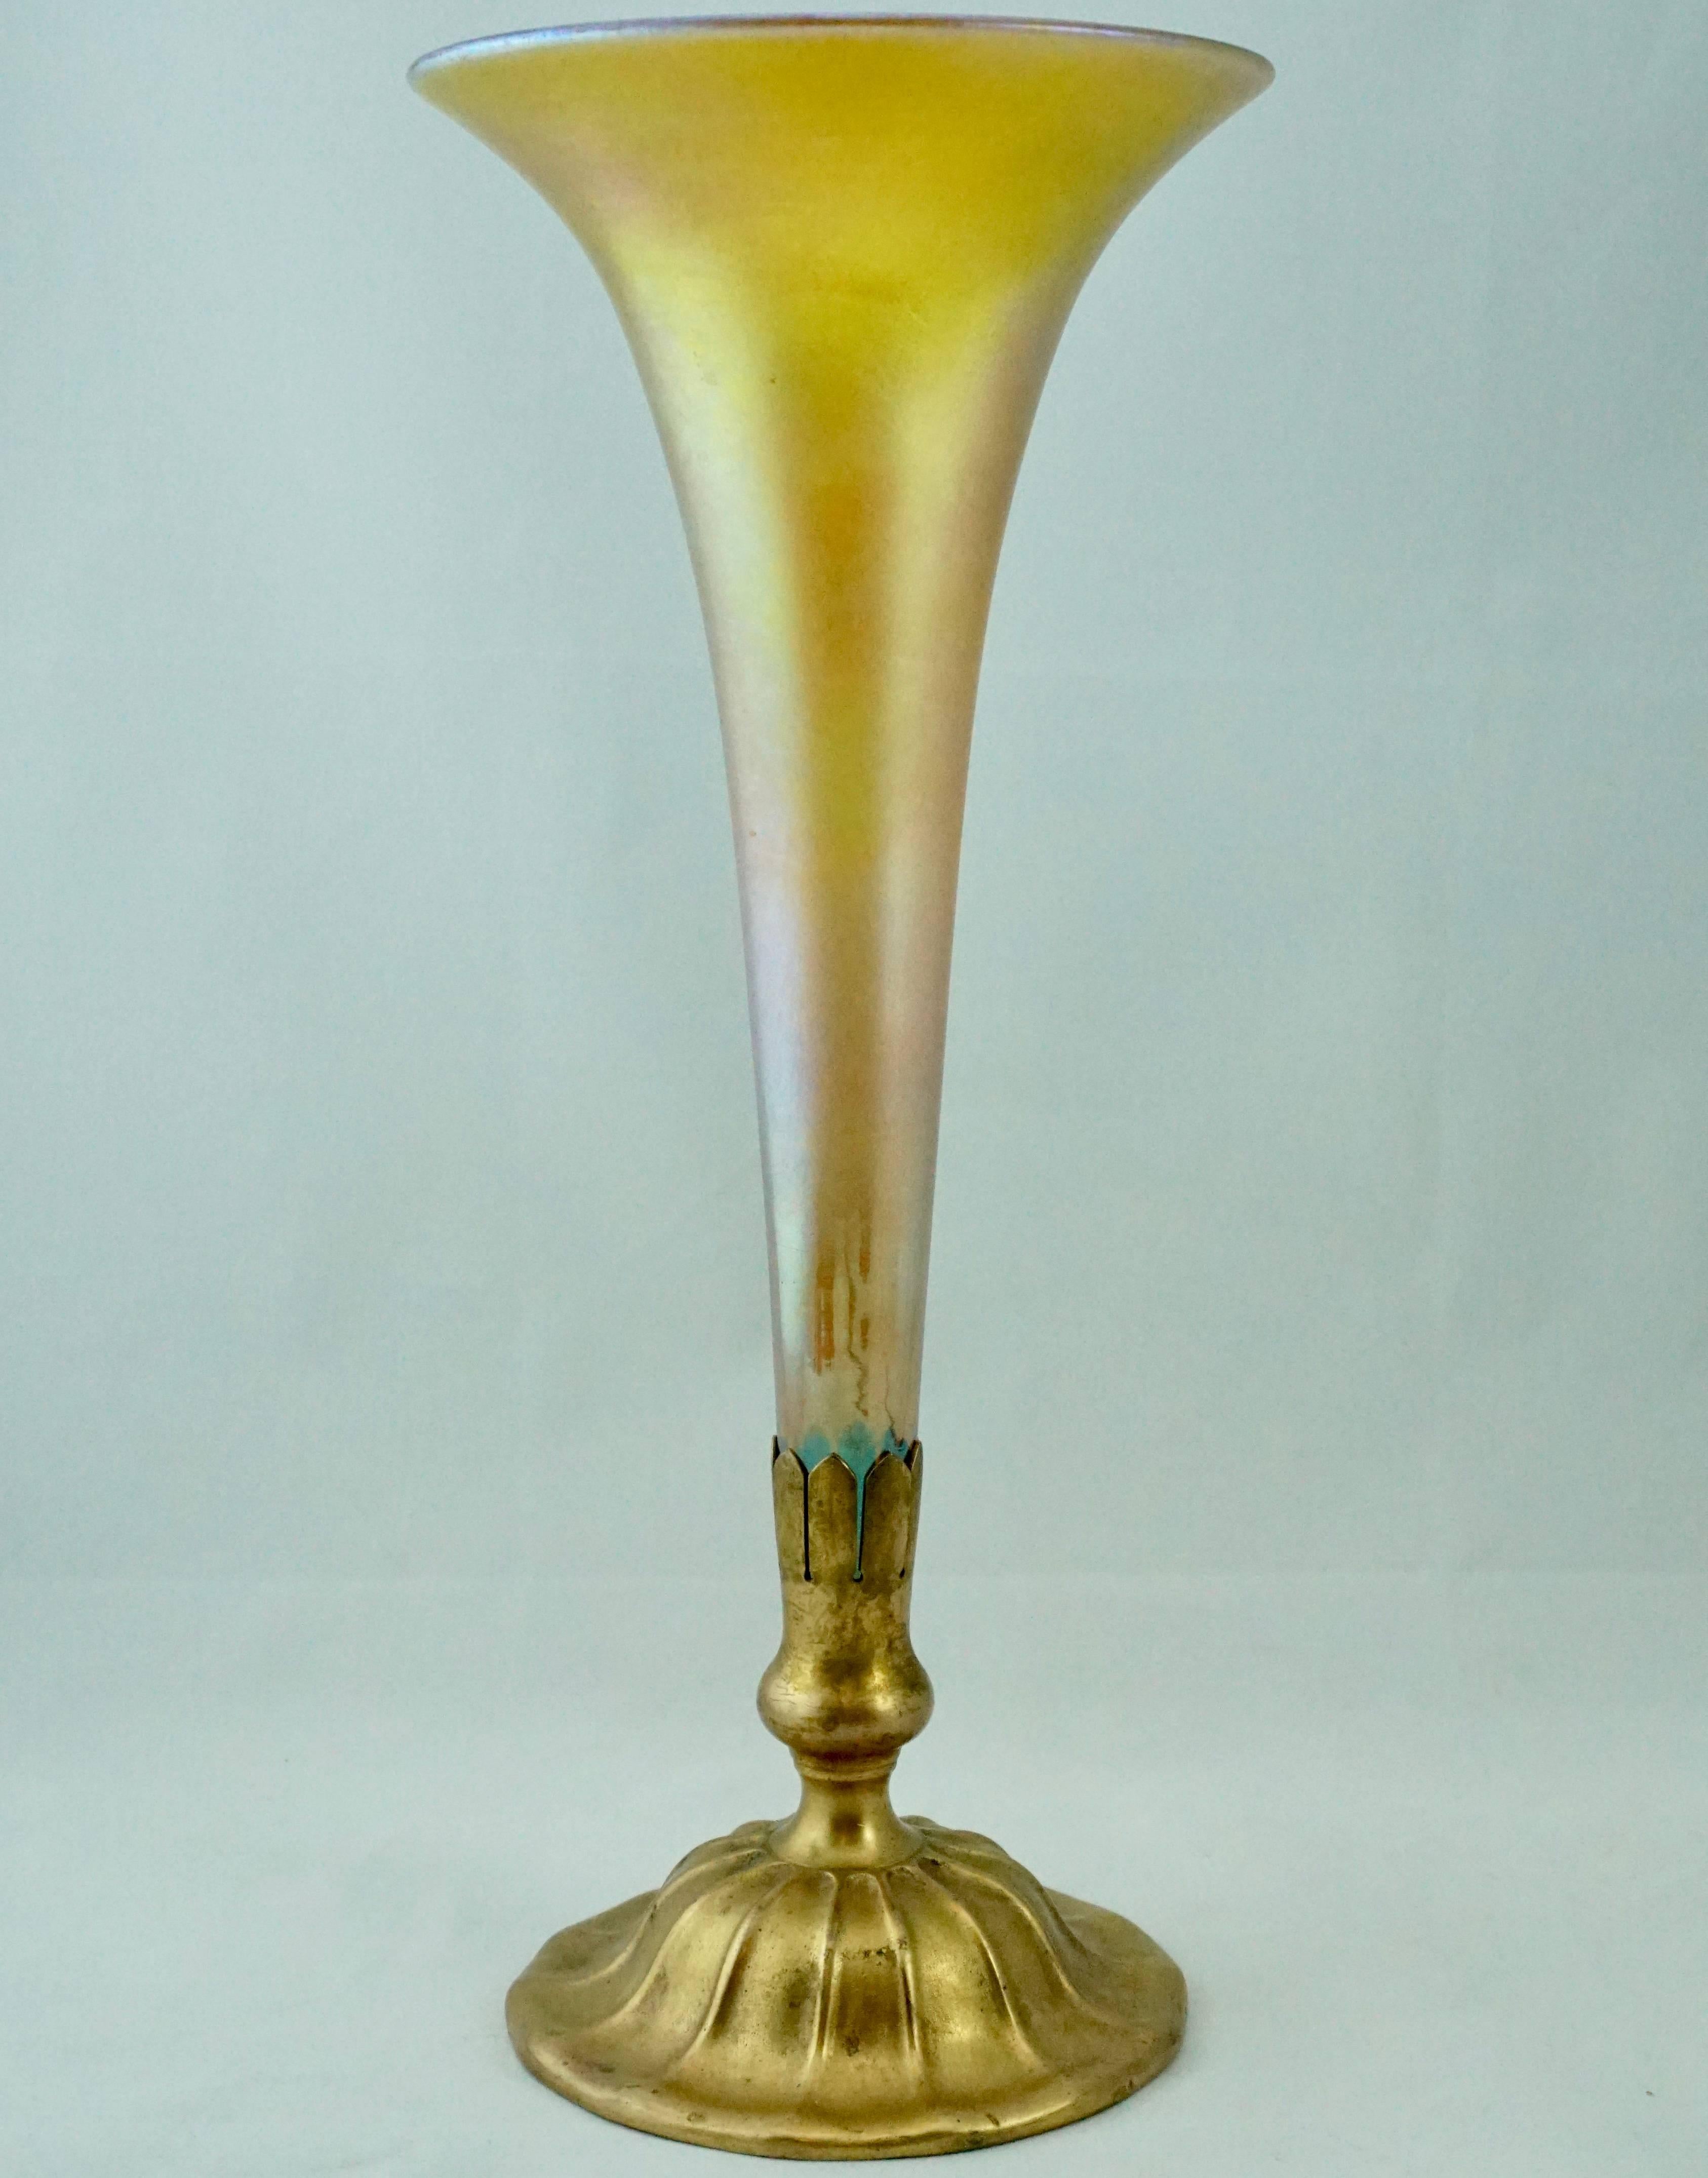 Beautiful gold favrile glass trumpet vase that sits snug in a gilt gold patinated bronze Louis C Tiffany Furnaces Inc. New York base. A beautiful Art Nouveau decorative piece.

Measures: Height 15 inches
Width 6.25 inches.

Condition: Very good with